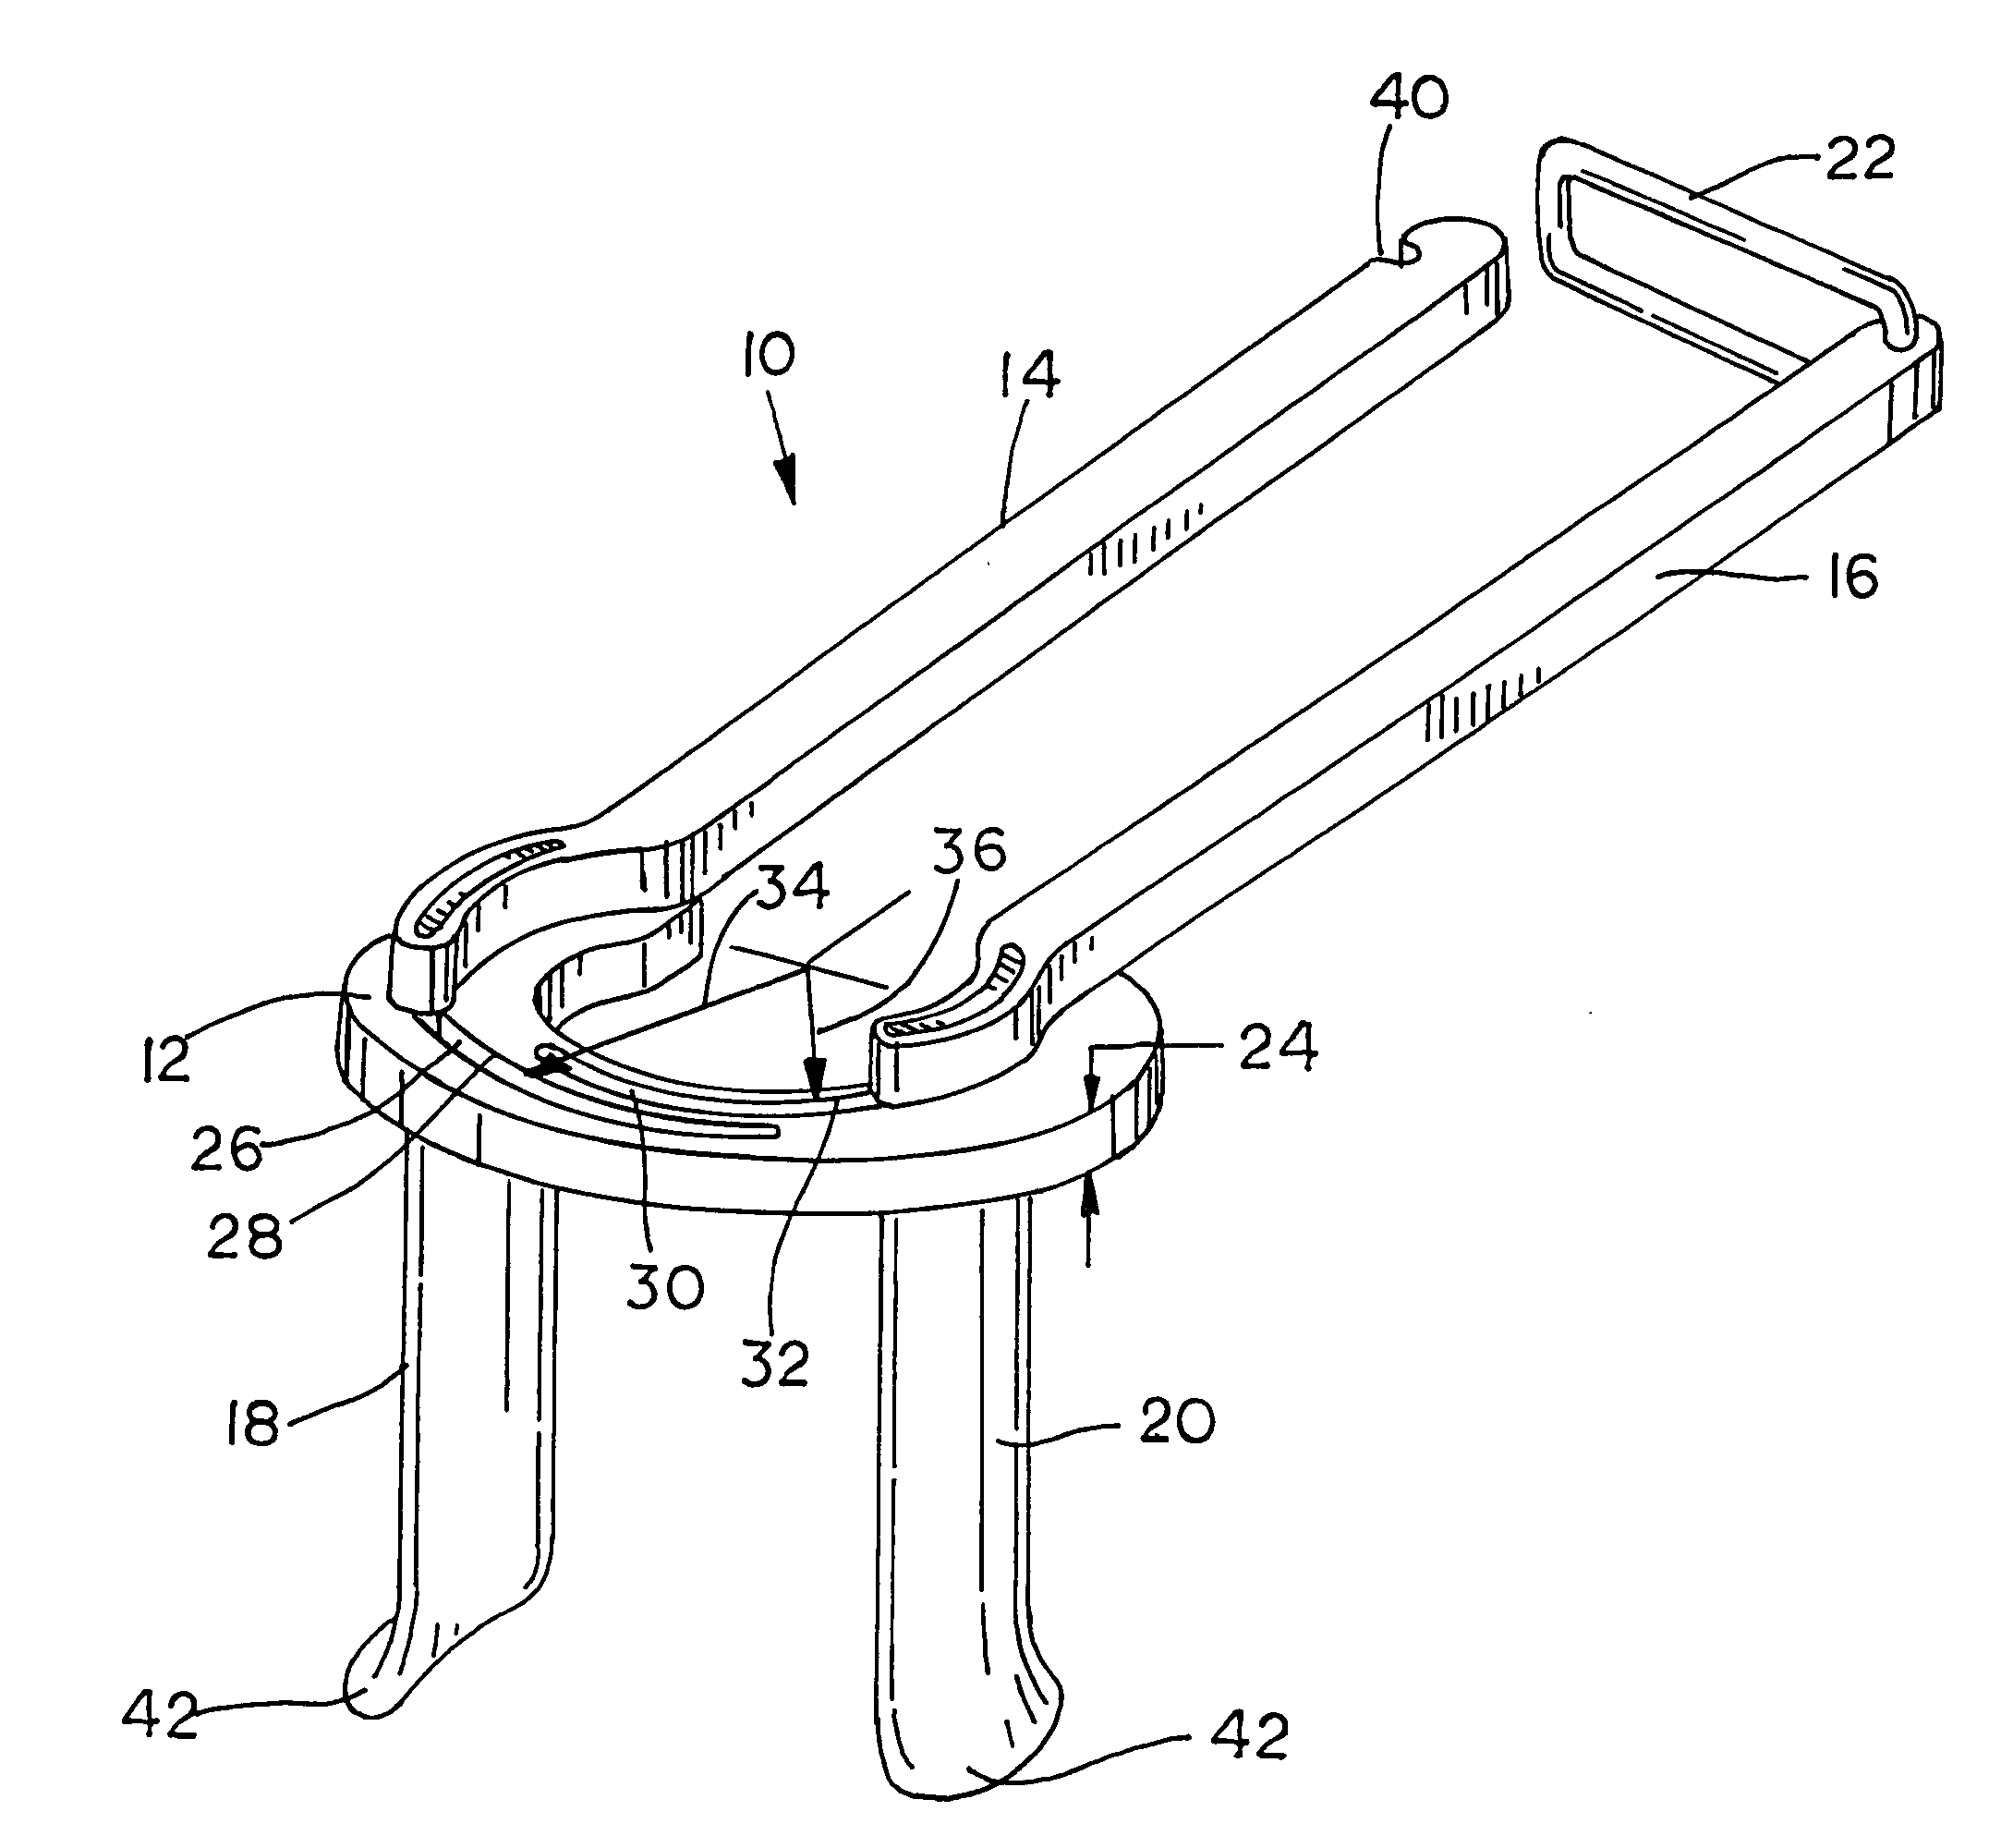 Radially expanding surgical retractor